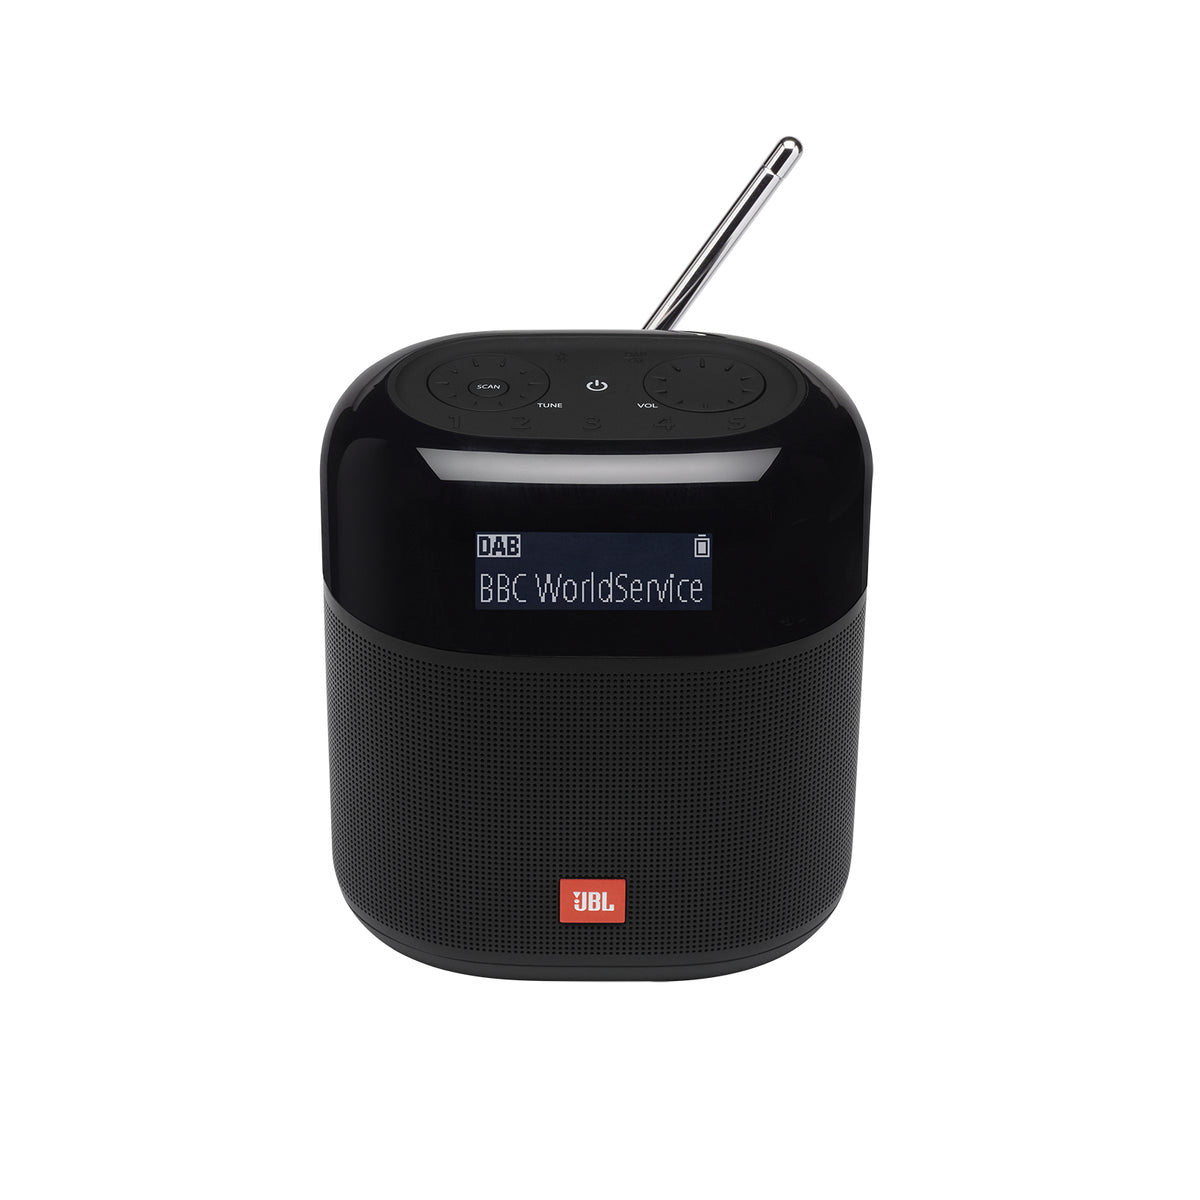 JBL Bluetooth DAB/DAB+/FM Portable Radio with 5 Memory Buttons and LCD, Waterproof - Black (TunnerXL)